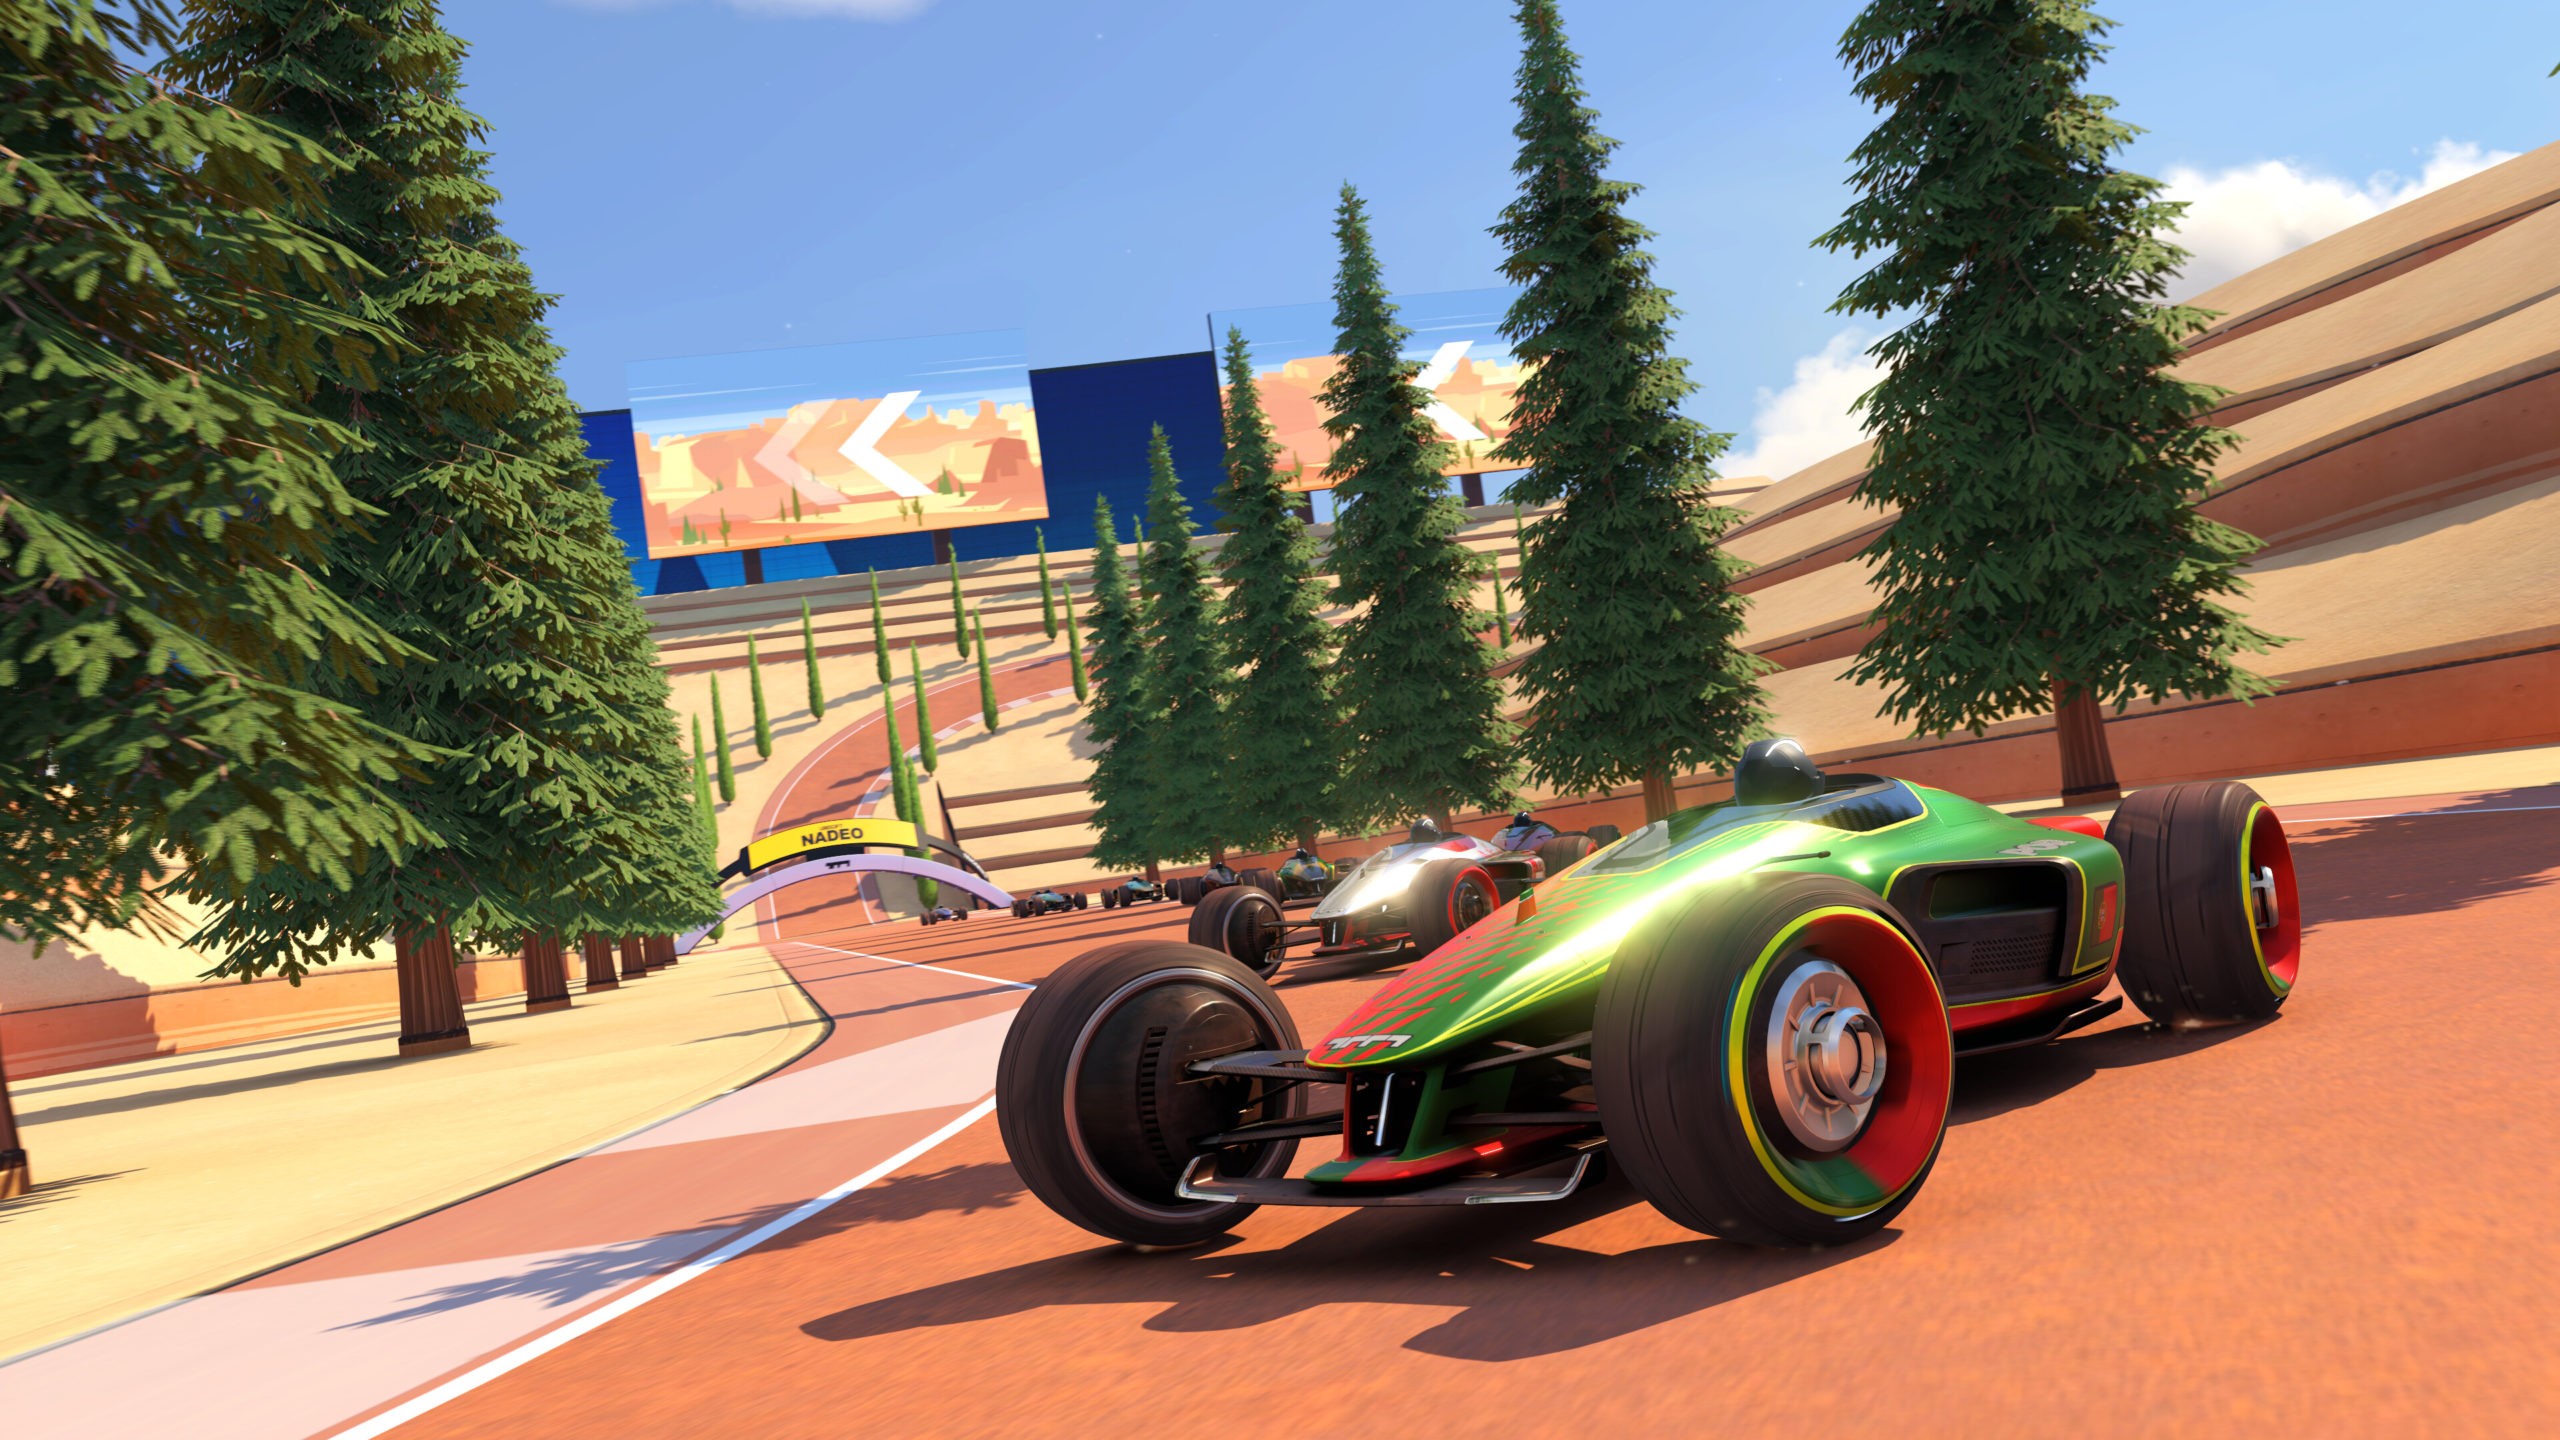 Trackmania’s Fall Campaign Brings 25 New Tracks, 100 New Medals and